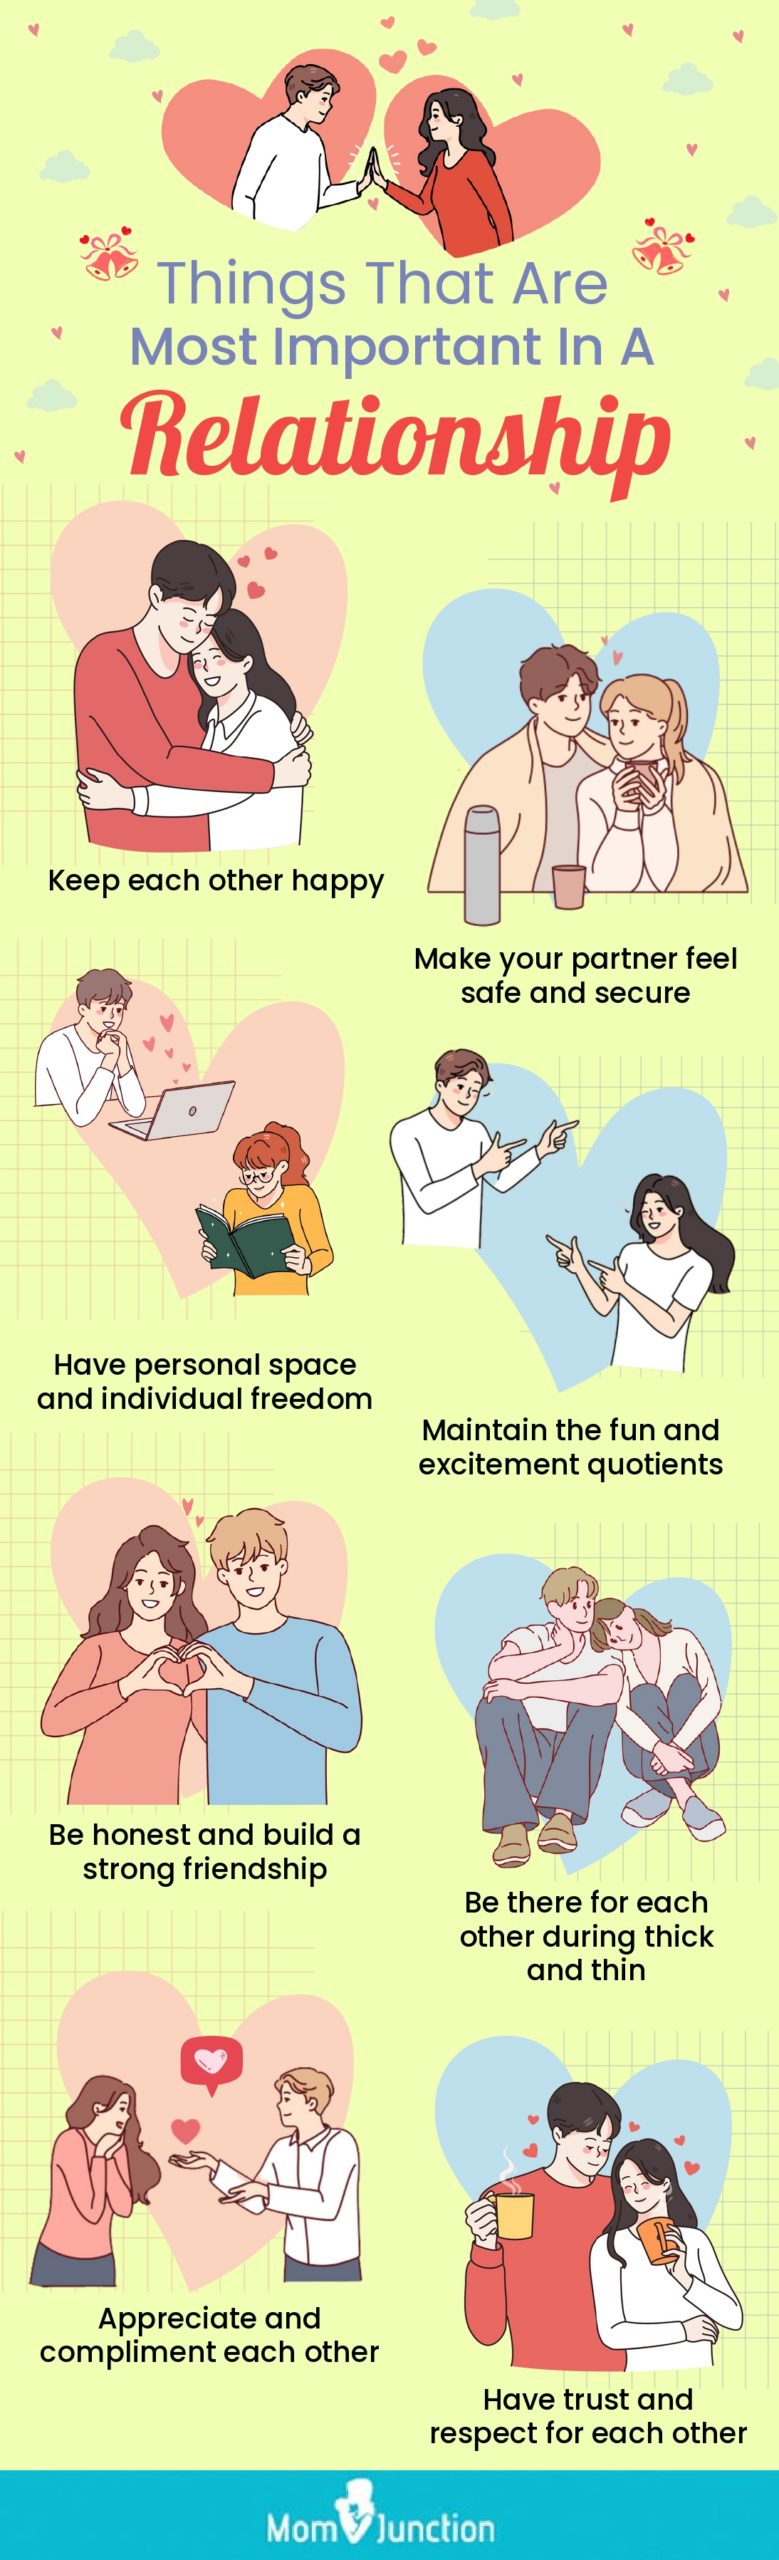 things that are most important in a relationship [infographic]